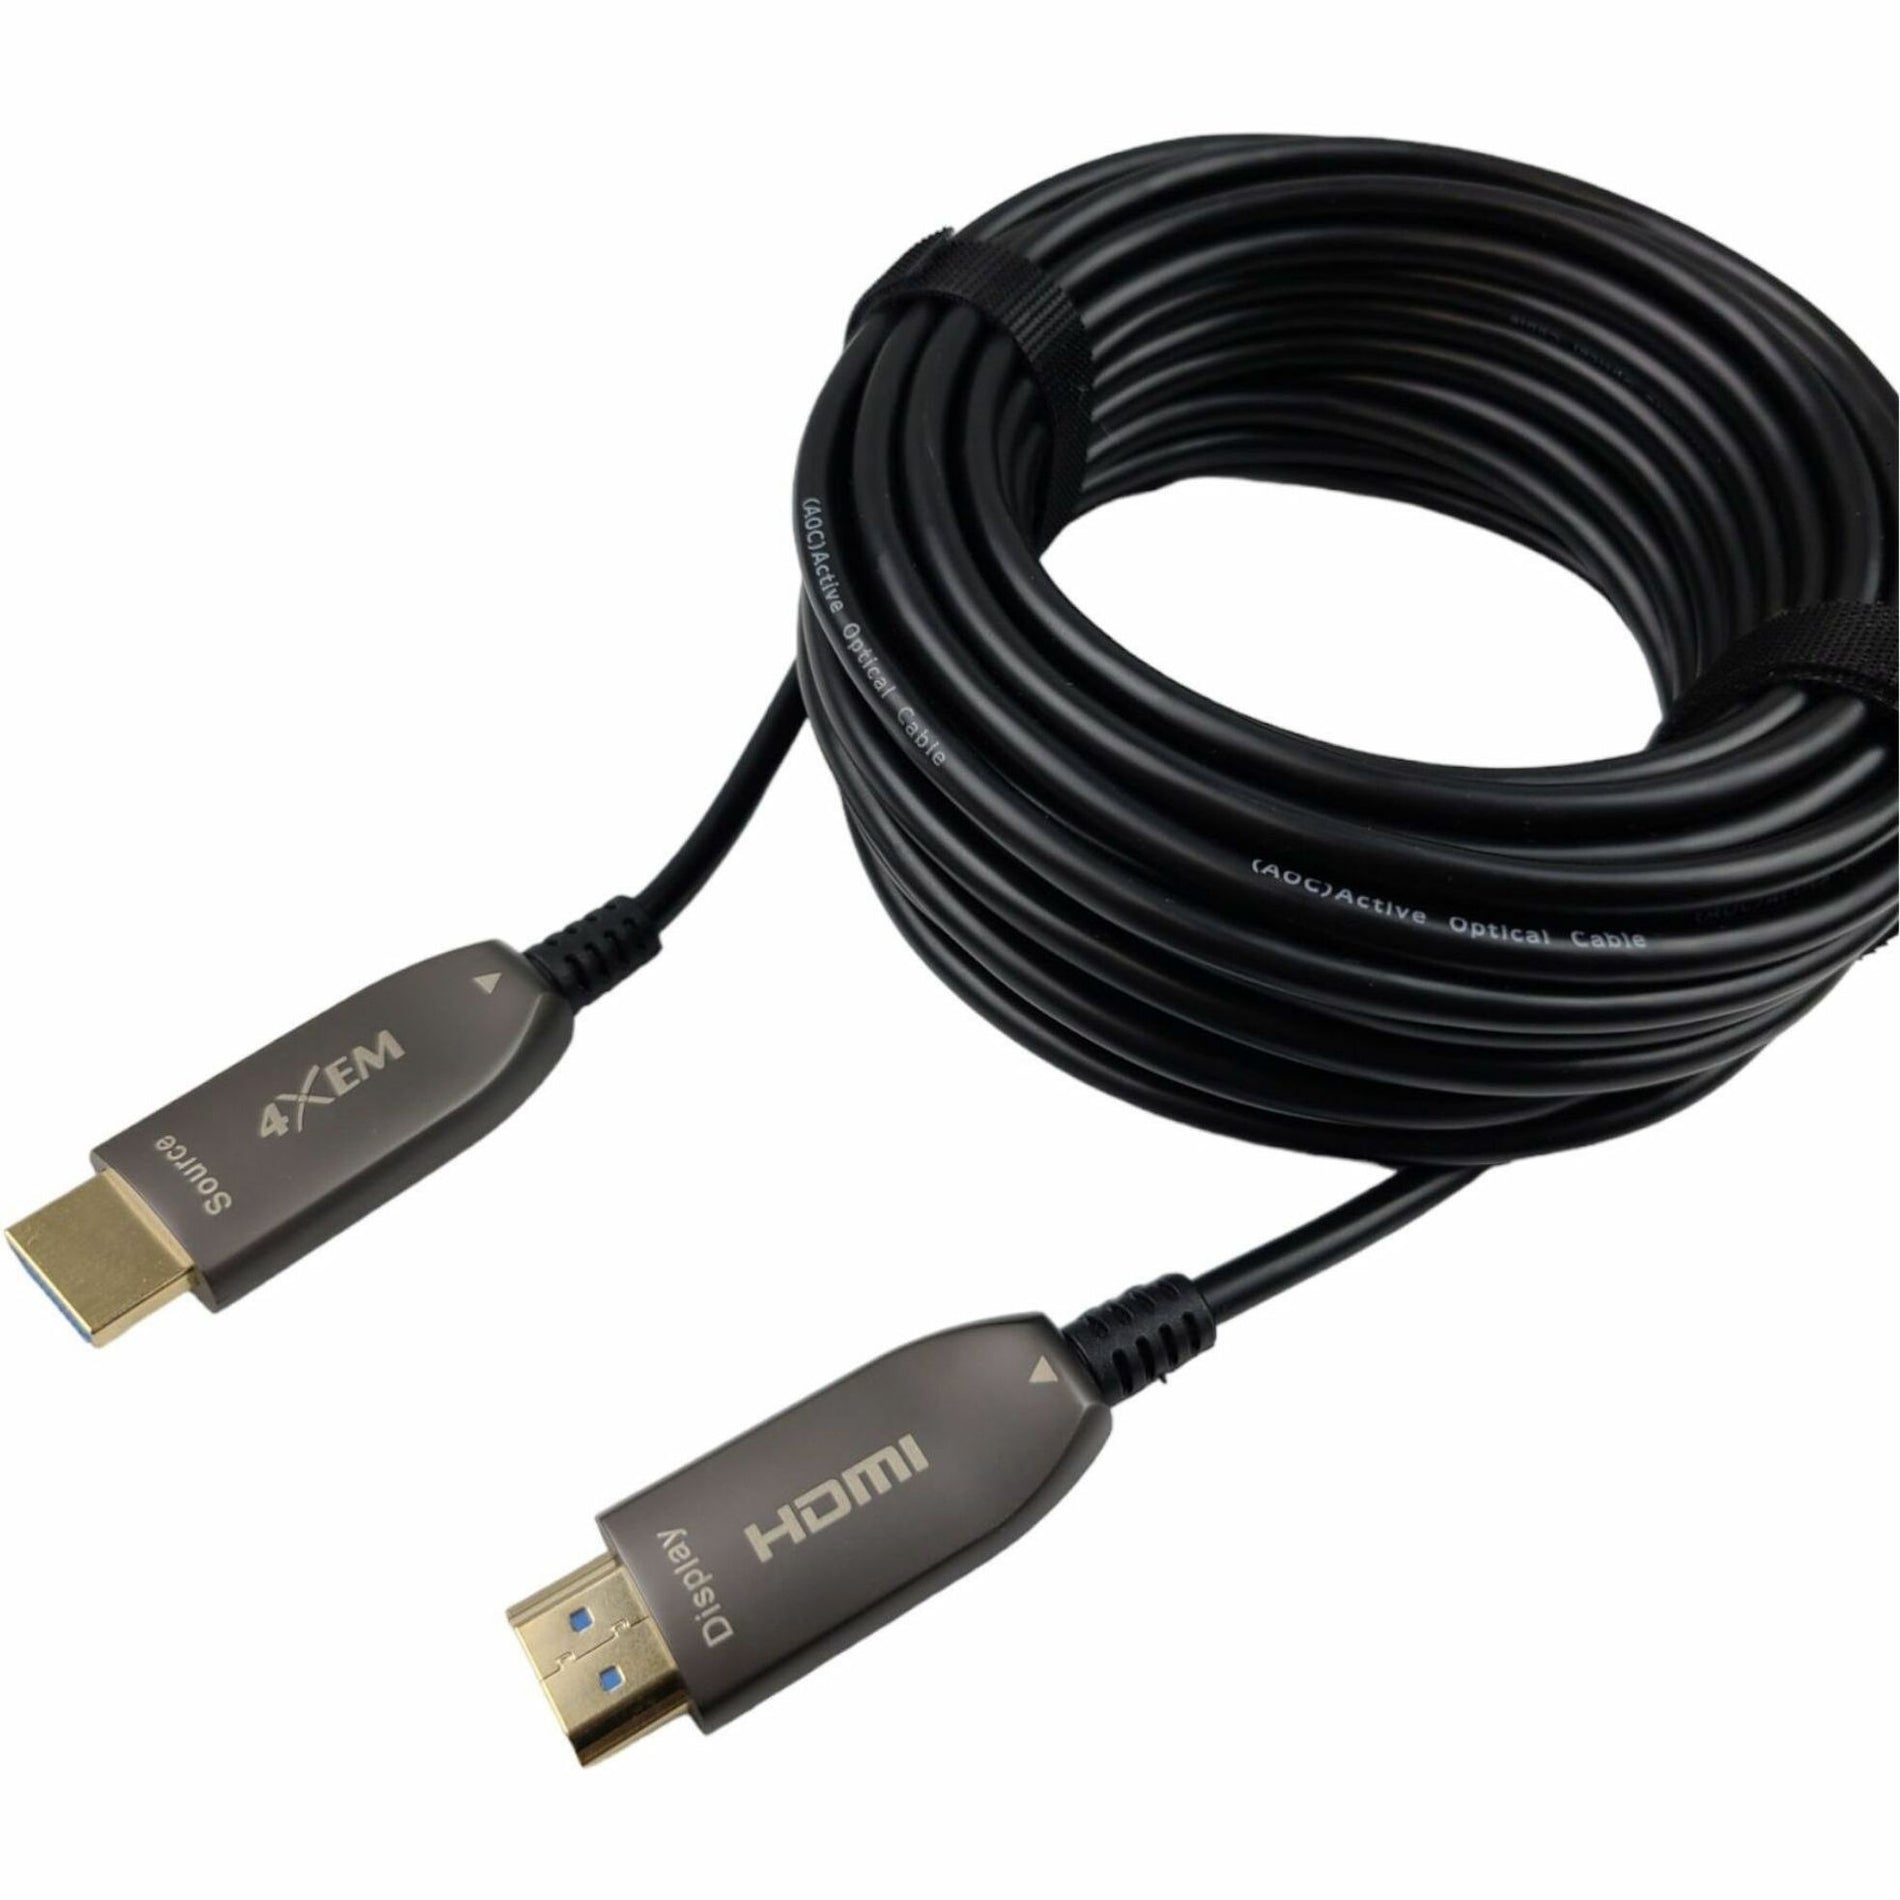 4XEM 4XFIBERHDMI5M8K 16 Ft High Speed Active Optical Fiber HDMI 2.1 Cable, Stranded, EMI/RF Protection, AOC Technology, HDR Support, HDCP, CMG Jacket, 48 Gbit/s Data Transfer Rate, 7680 x 4320 Supported Resolution